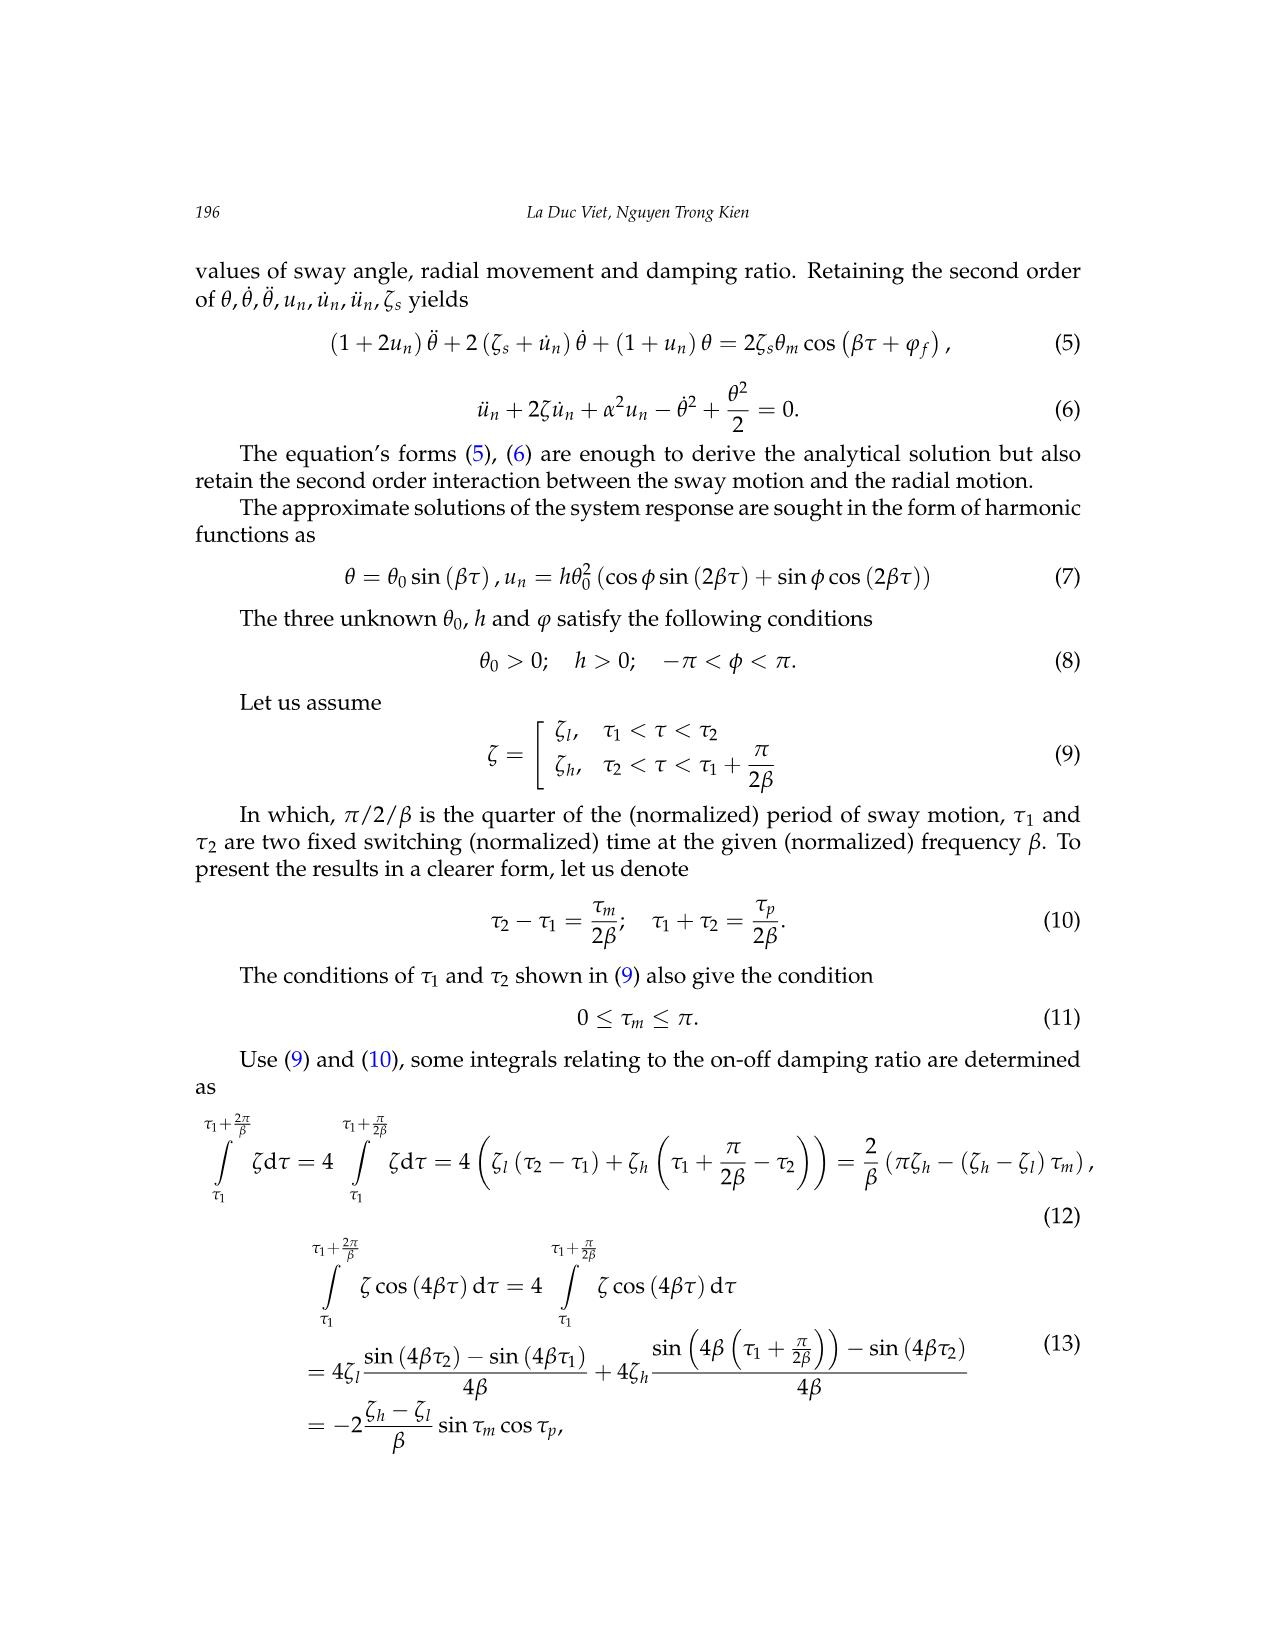 Lower bound of performance index of anti - sway control of a pendulum using on-off damping radial spring - damper trang 4